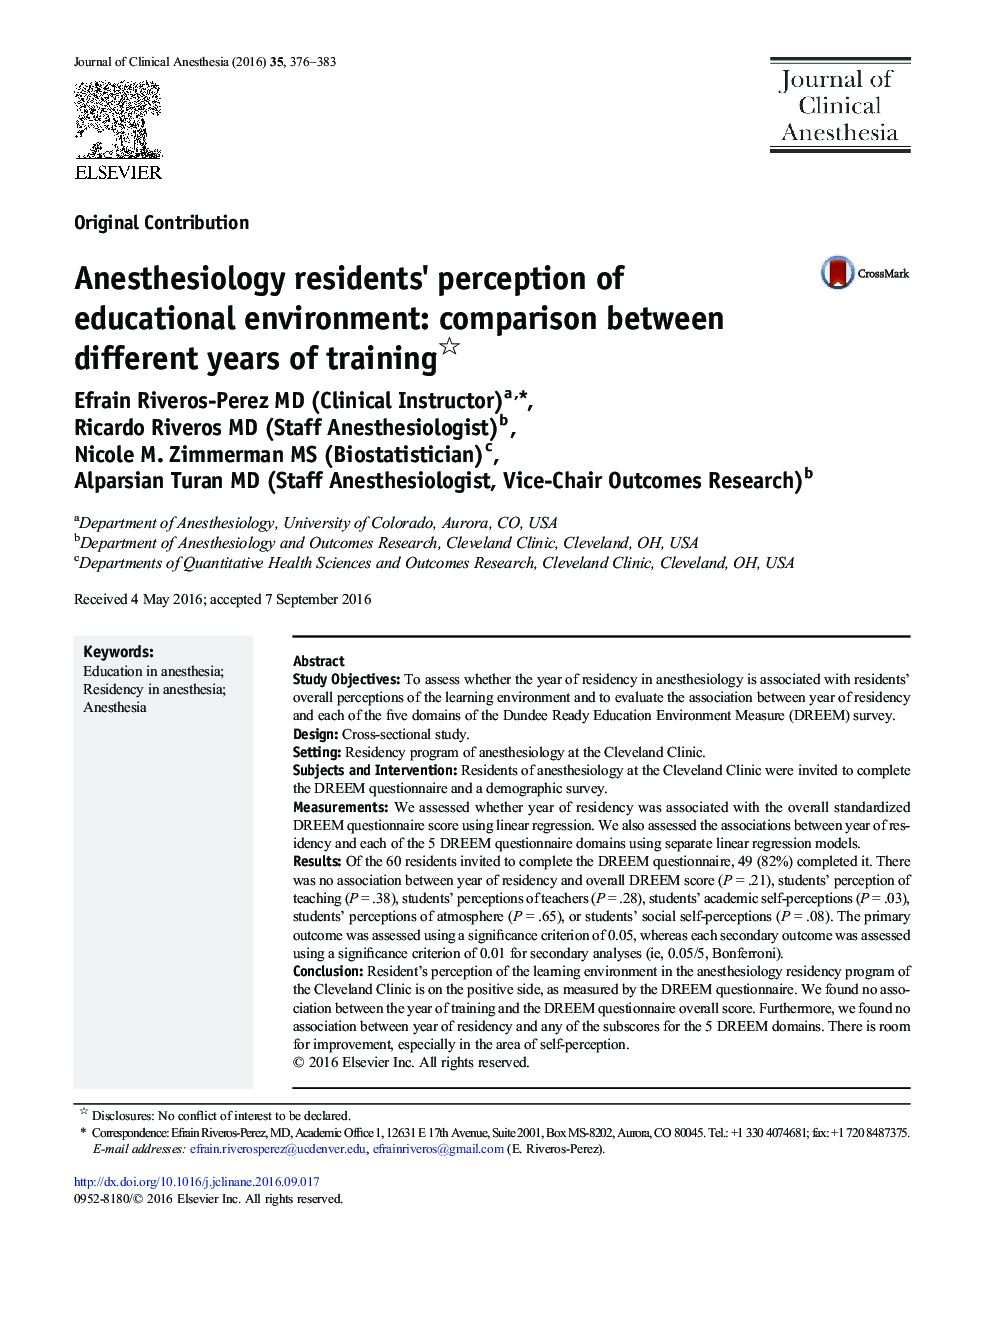 Anesthesiology residents' perception of educational environment: comparison between different years of training